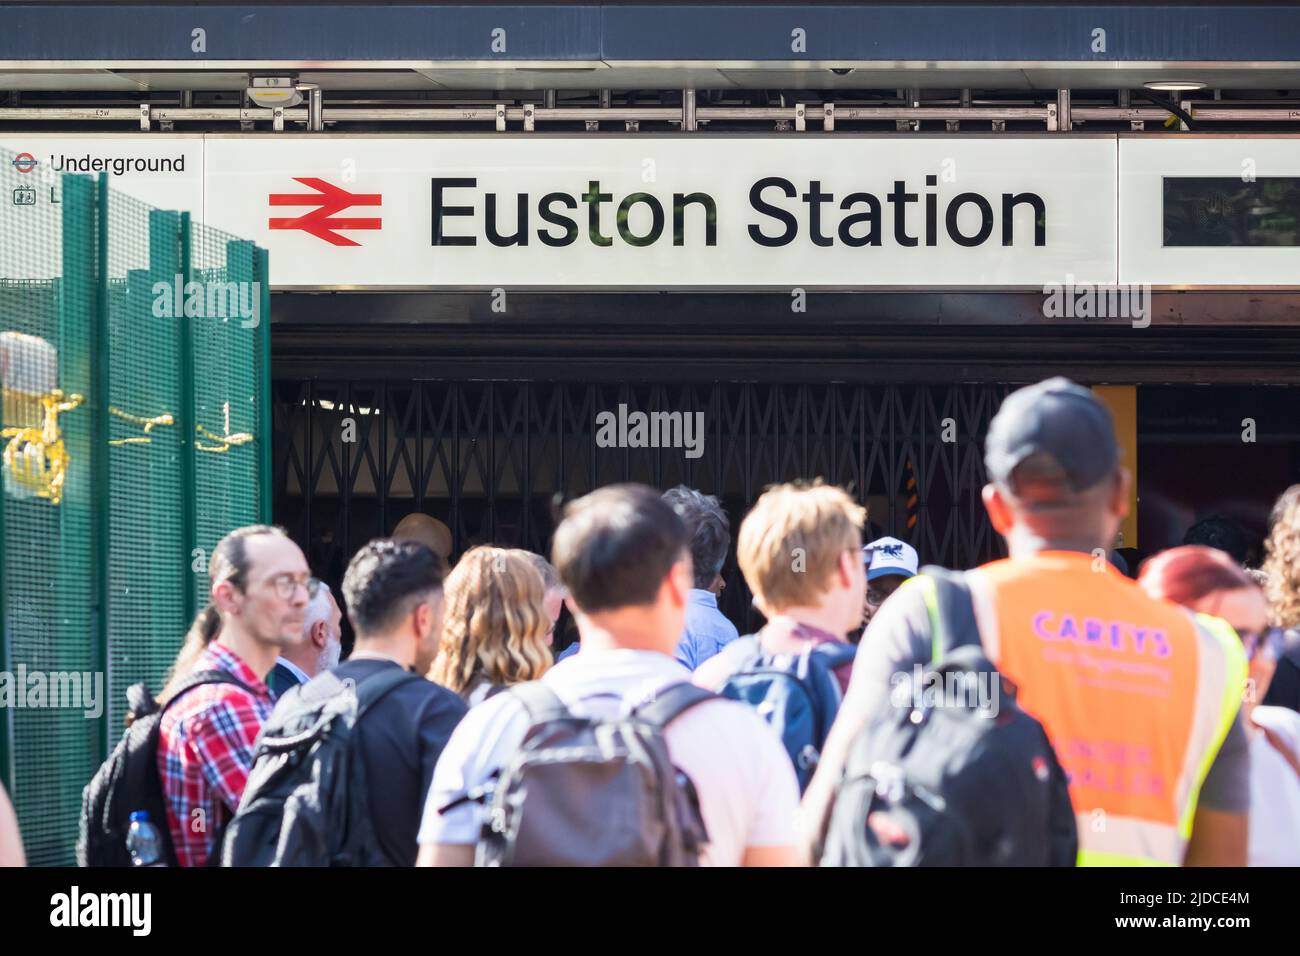 London, UK - 17 June, 2022 - Crowd of train passengers forced to wait outside the Euston Station due to temporary service closure Stock Photo